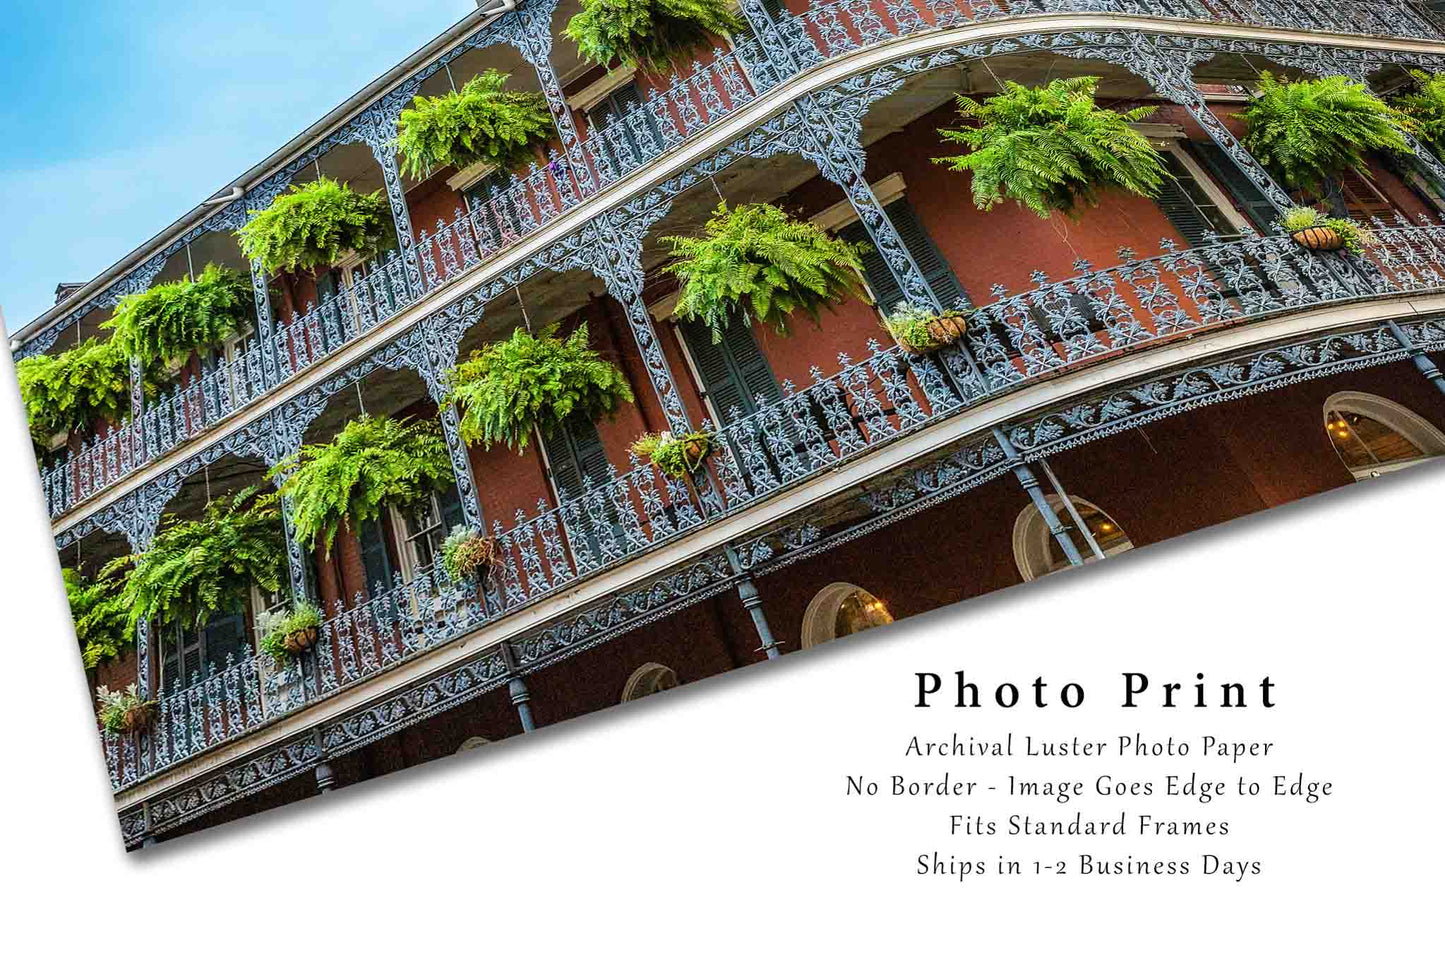 New Orleans Photography Print - Wall Art Picture of Hanging Ferns On Corner Building in French Quarter Southern Louisiana Travel Decor